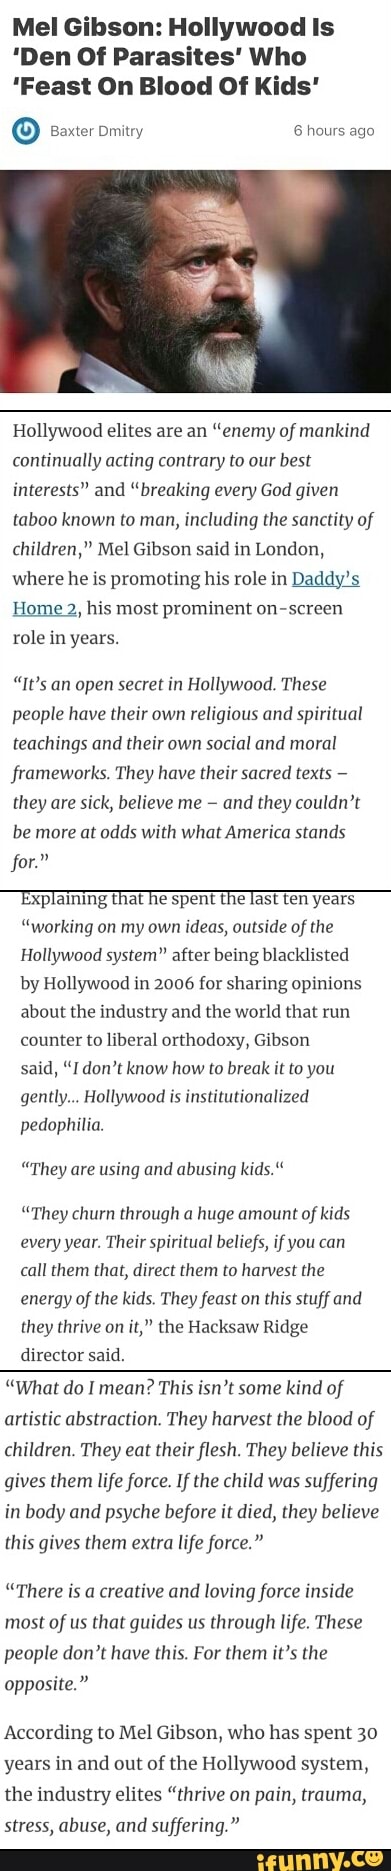 Mel Gibson: Hollywood ls 'Den Of Parasites' Who 'Feast 0n Blood Of Kids' Hollywood elites are an “enemy of mankind continually acting Contrary to our bes! Interests” and “breaking every God given taboo known ro man, including the sanctity of mumu," Mel Gibson said in Lundun, where he is promoting his role in Daddy; Home 2, his most prominent on-scrcen role in years. “It’s an open gene: in Hollywood. These people have their own religmus and spir[rual reaching: and their own Social and moral frameworks. They have their sacred texts ,